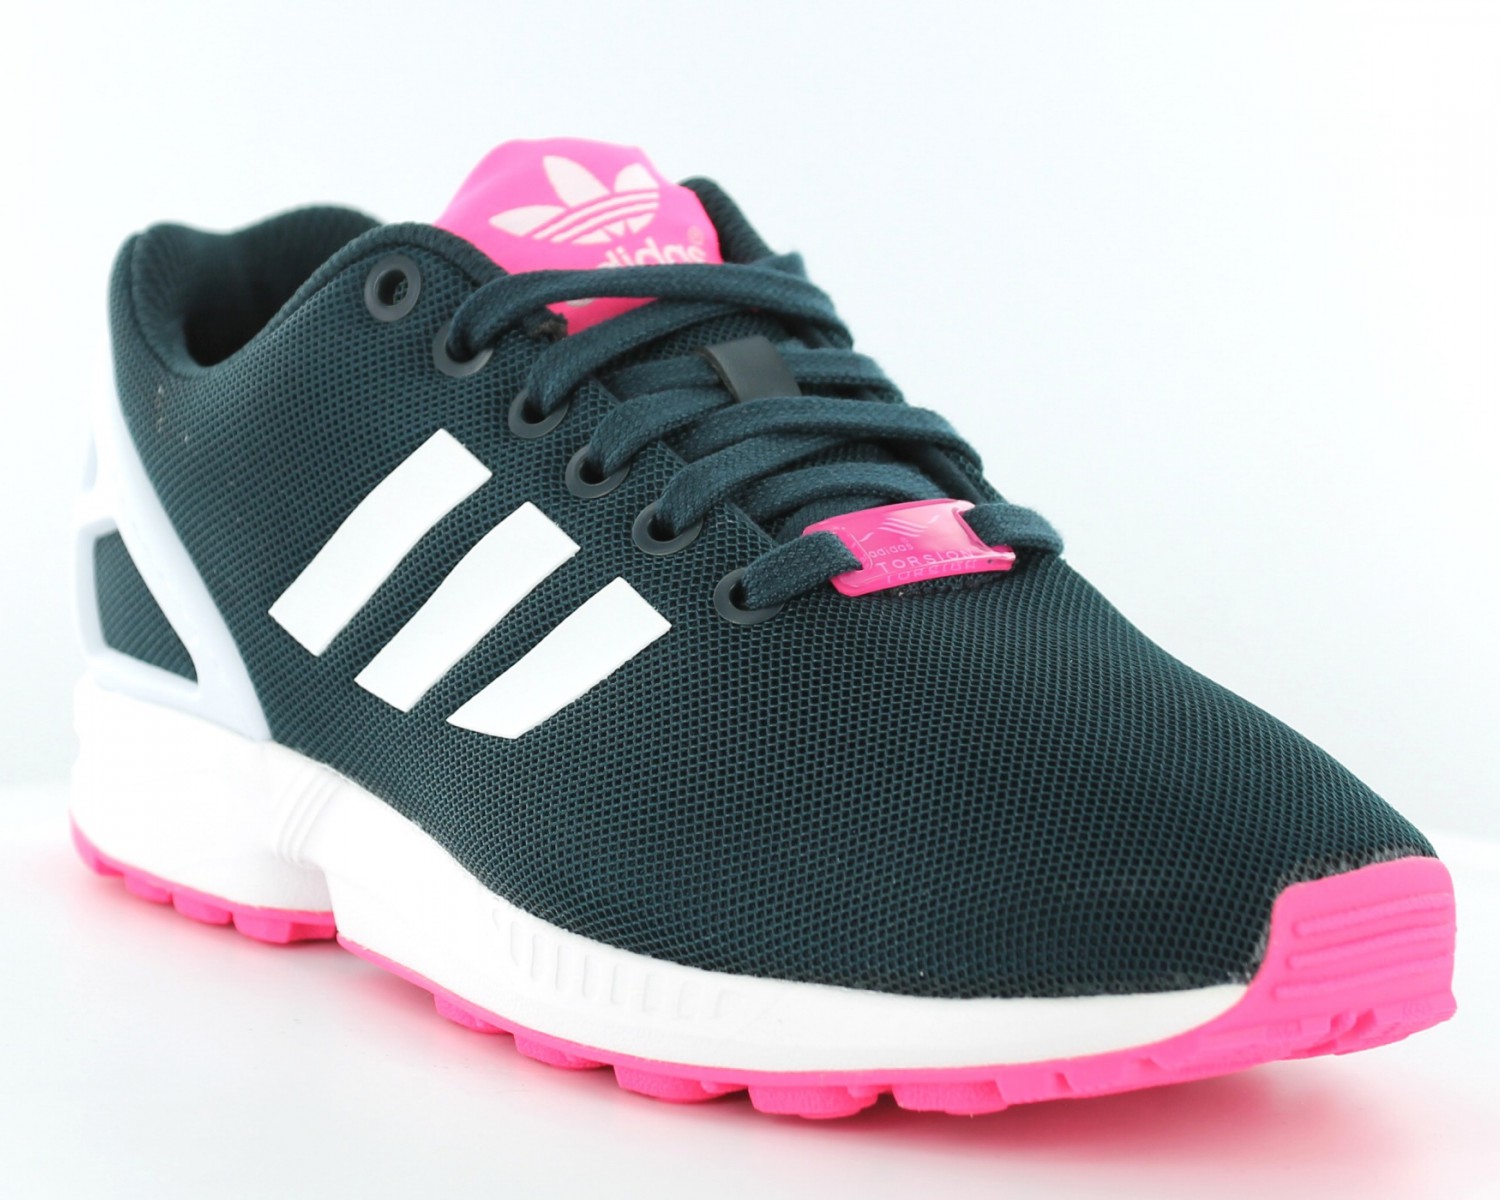 adidas zx flux femme rose Off 54% - www.bashhguidelines.org